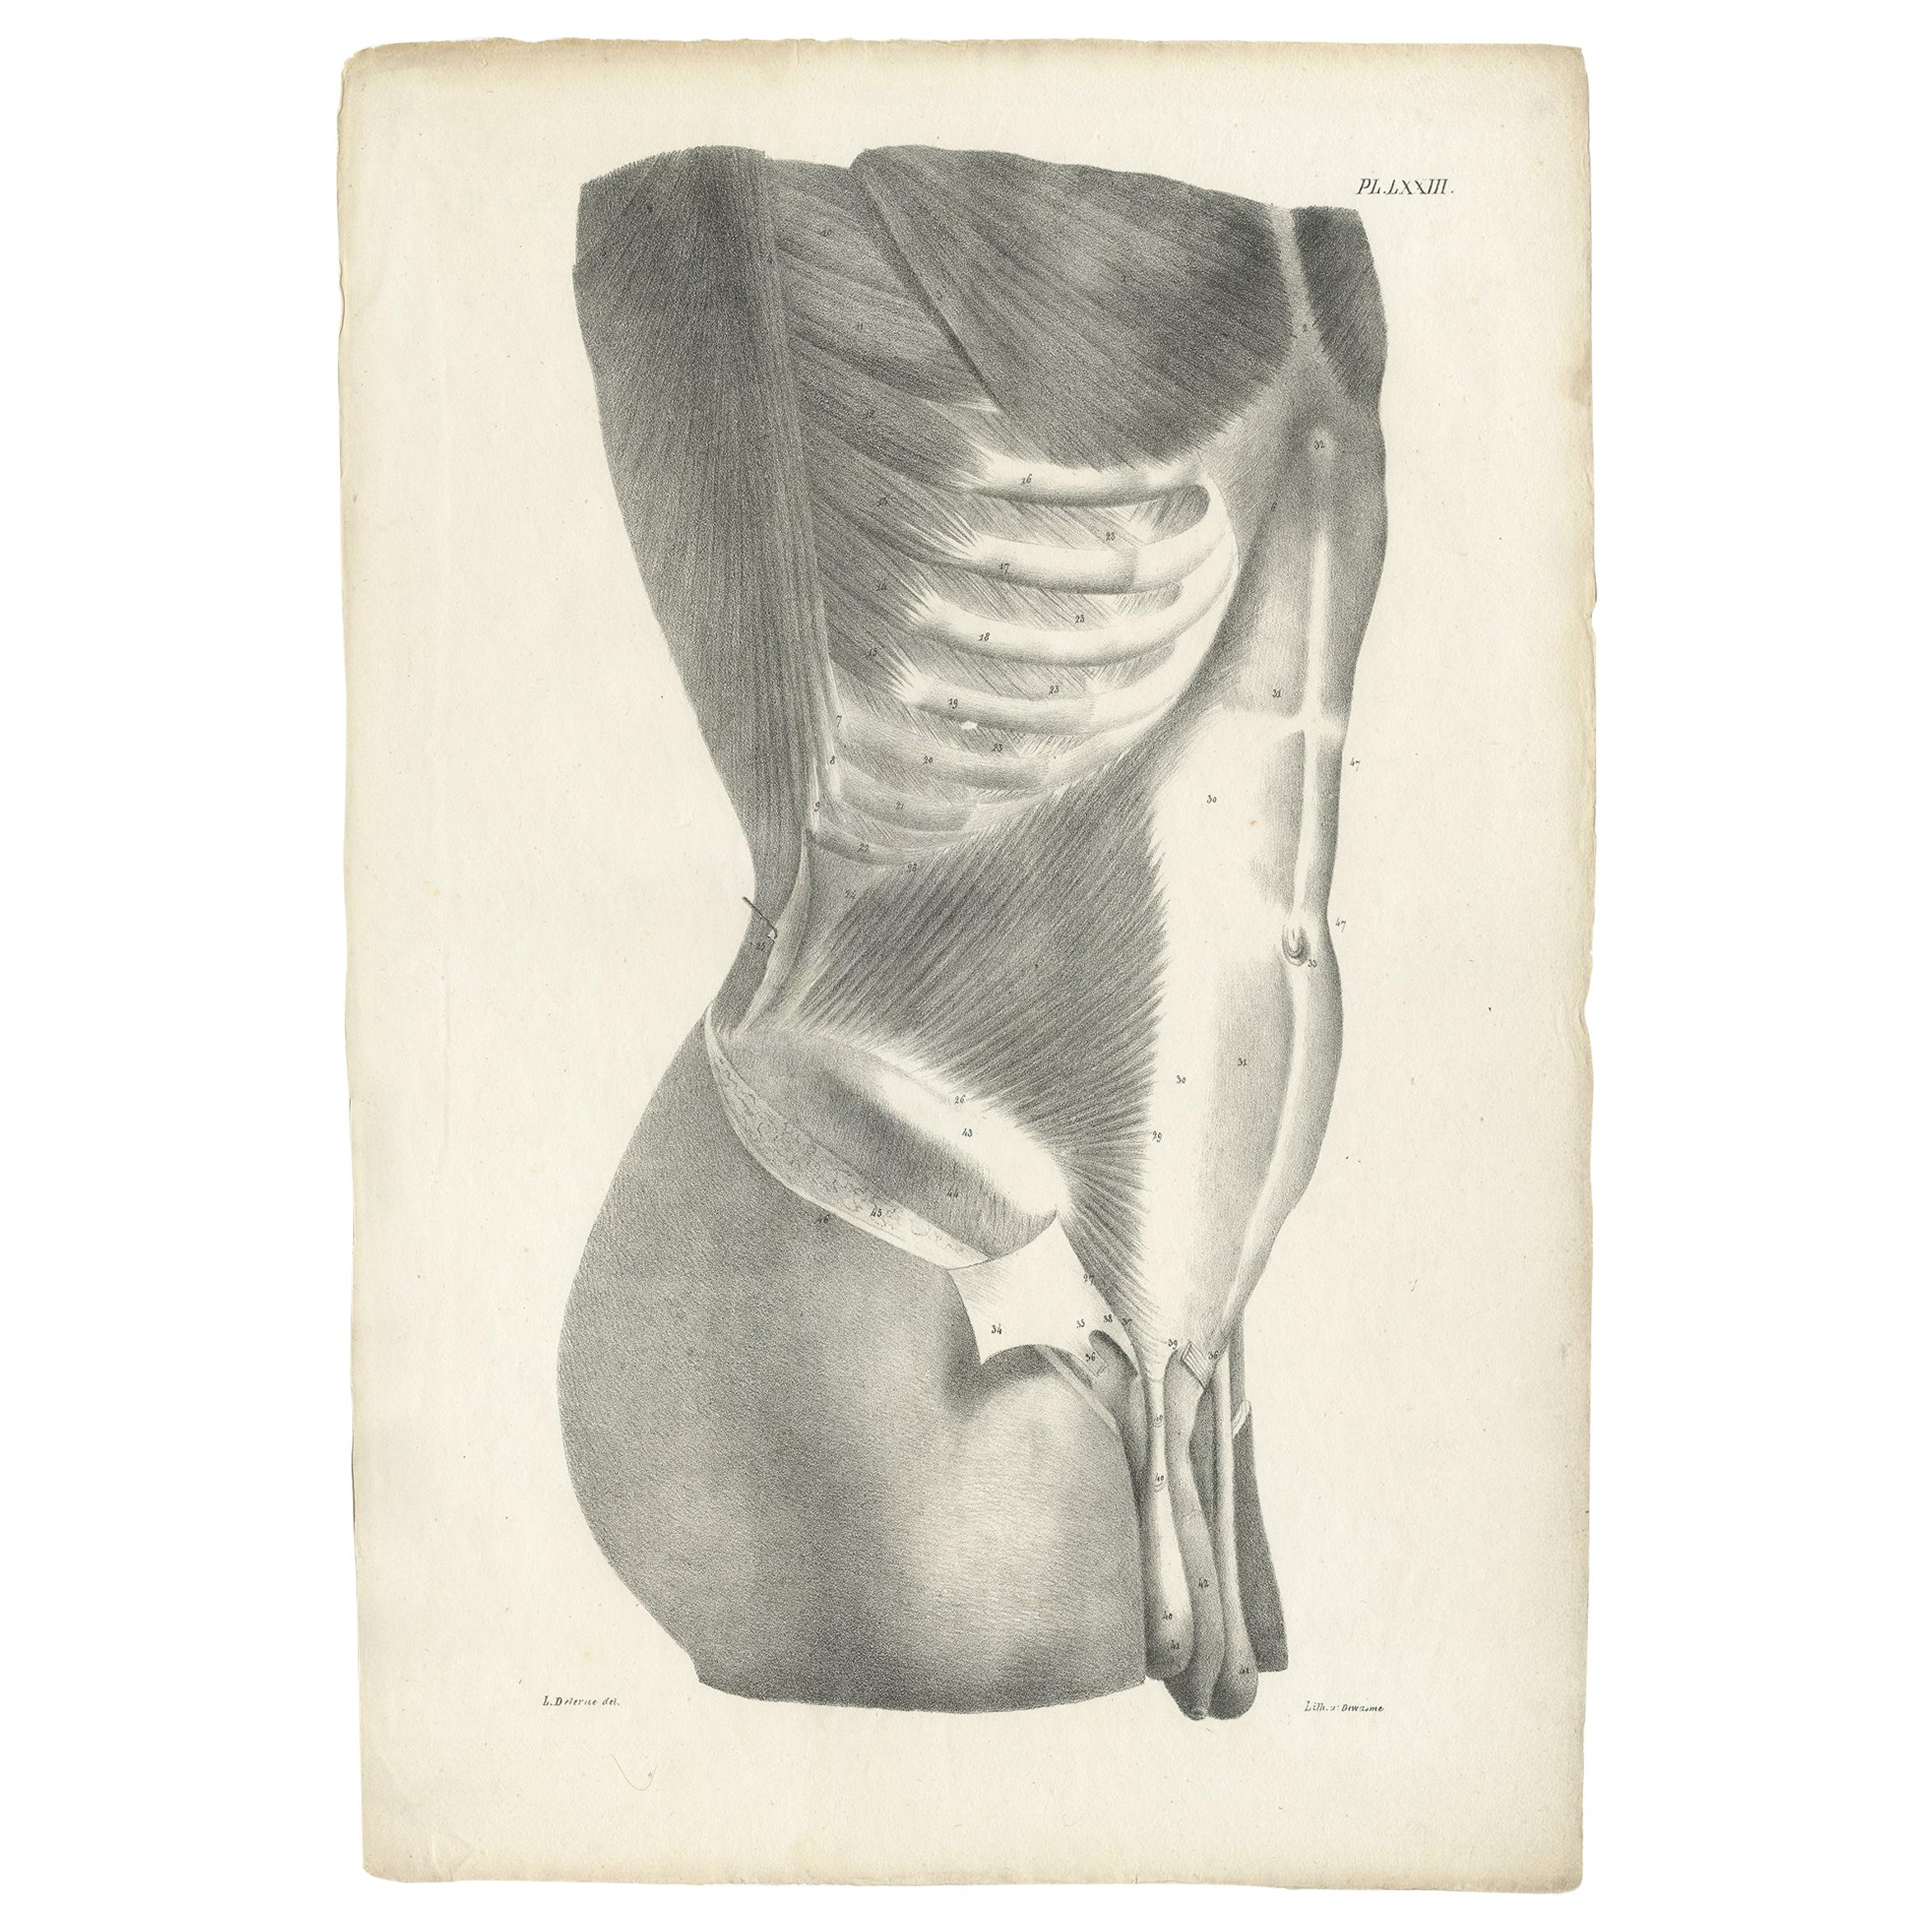 Pl. LXXIII Antique Anatomy / Medical Print of the Male Torso by Cloquet, '1821' For Sale